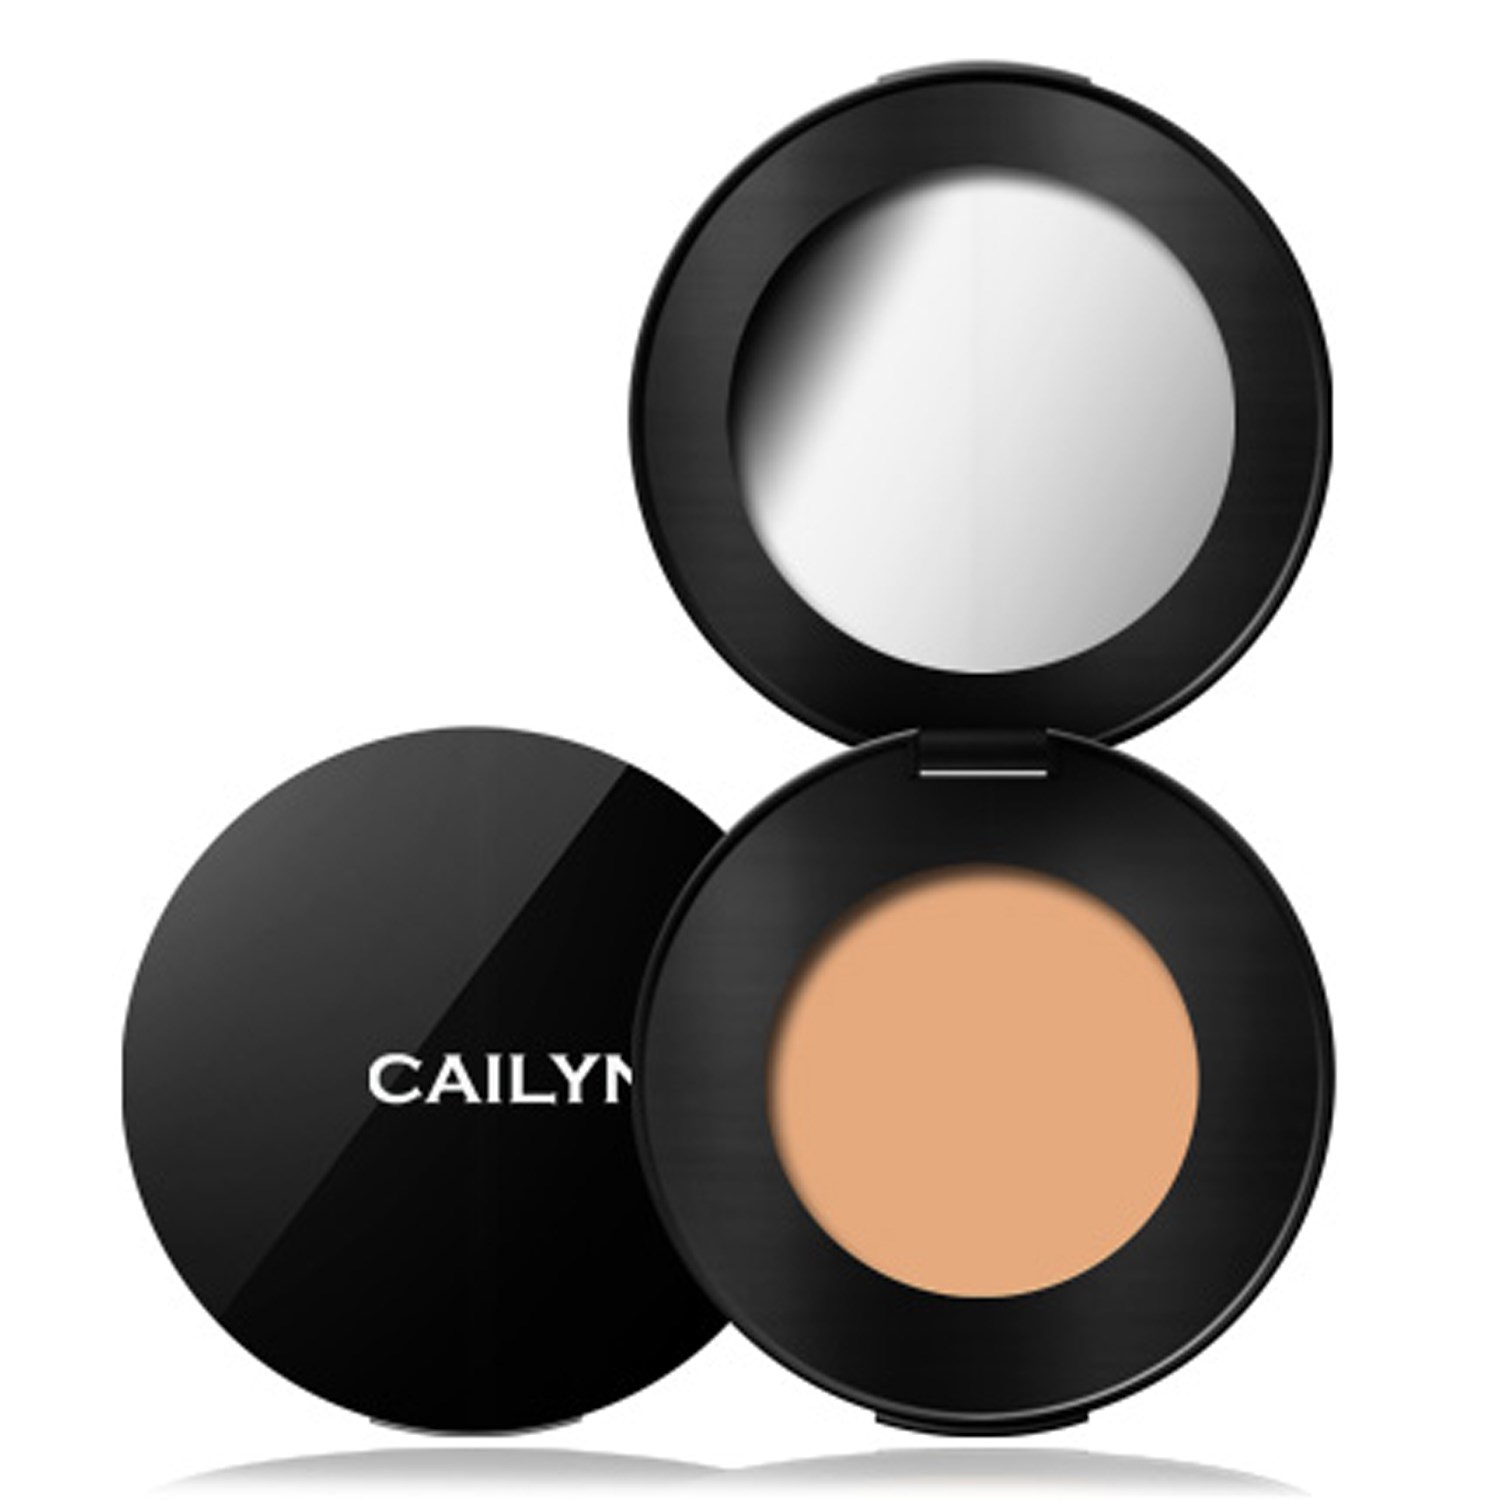 Cailyn Cosmetics Hd Coverage Concealer Linen